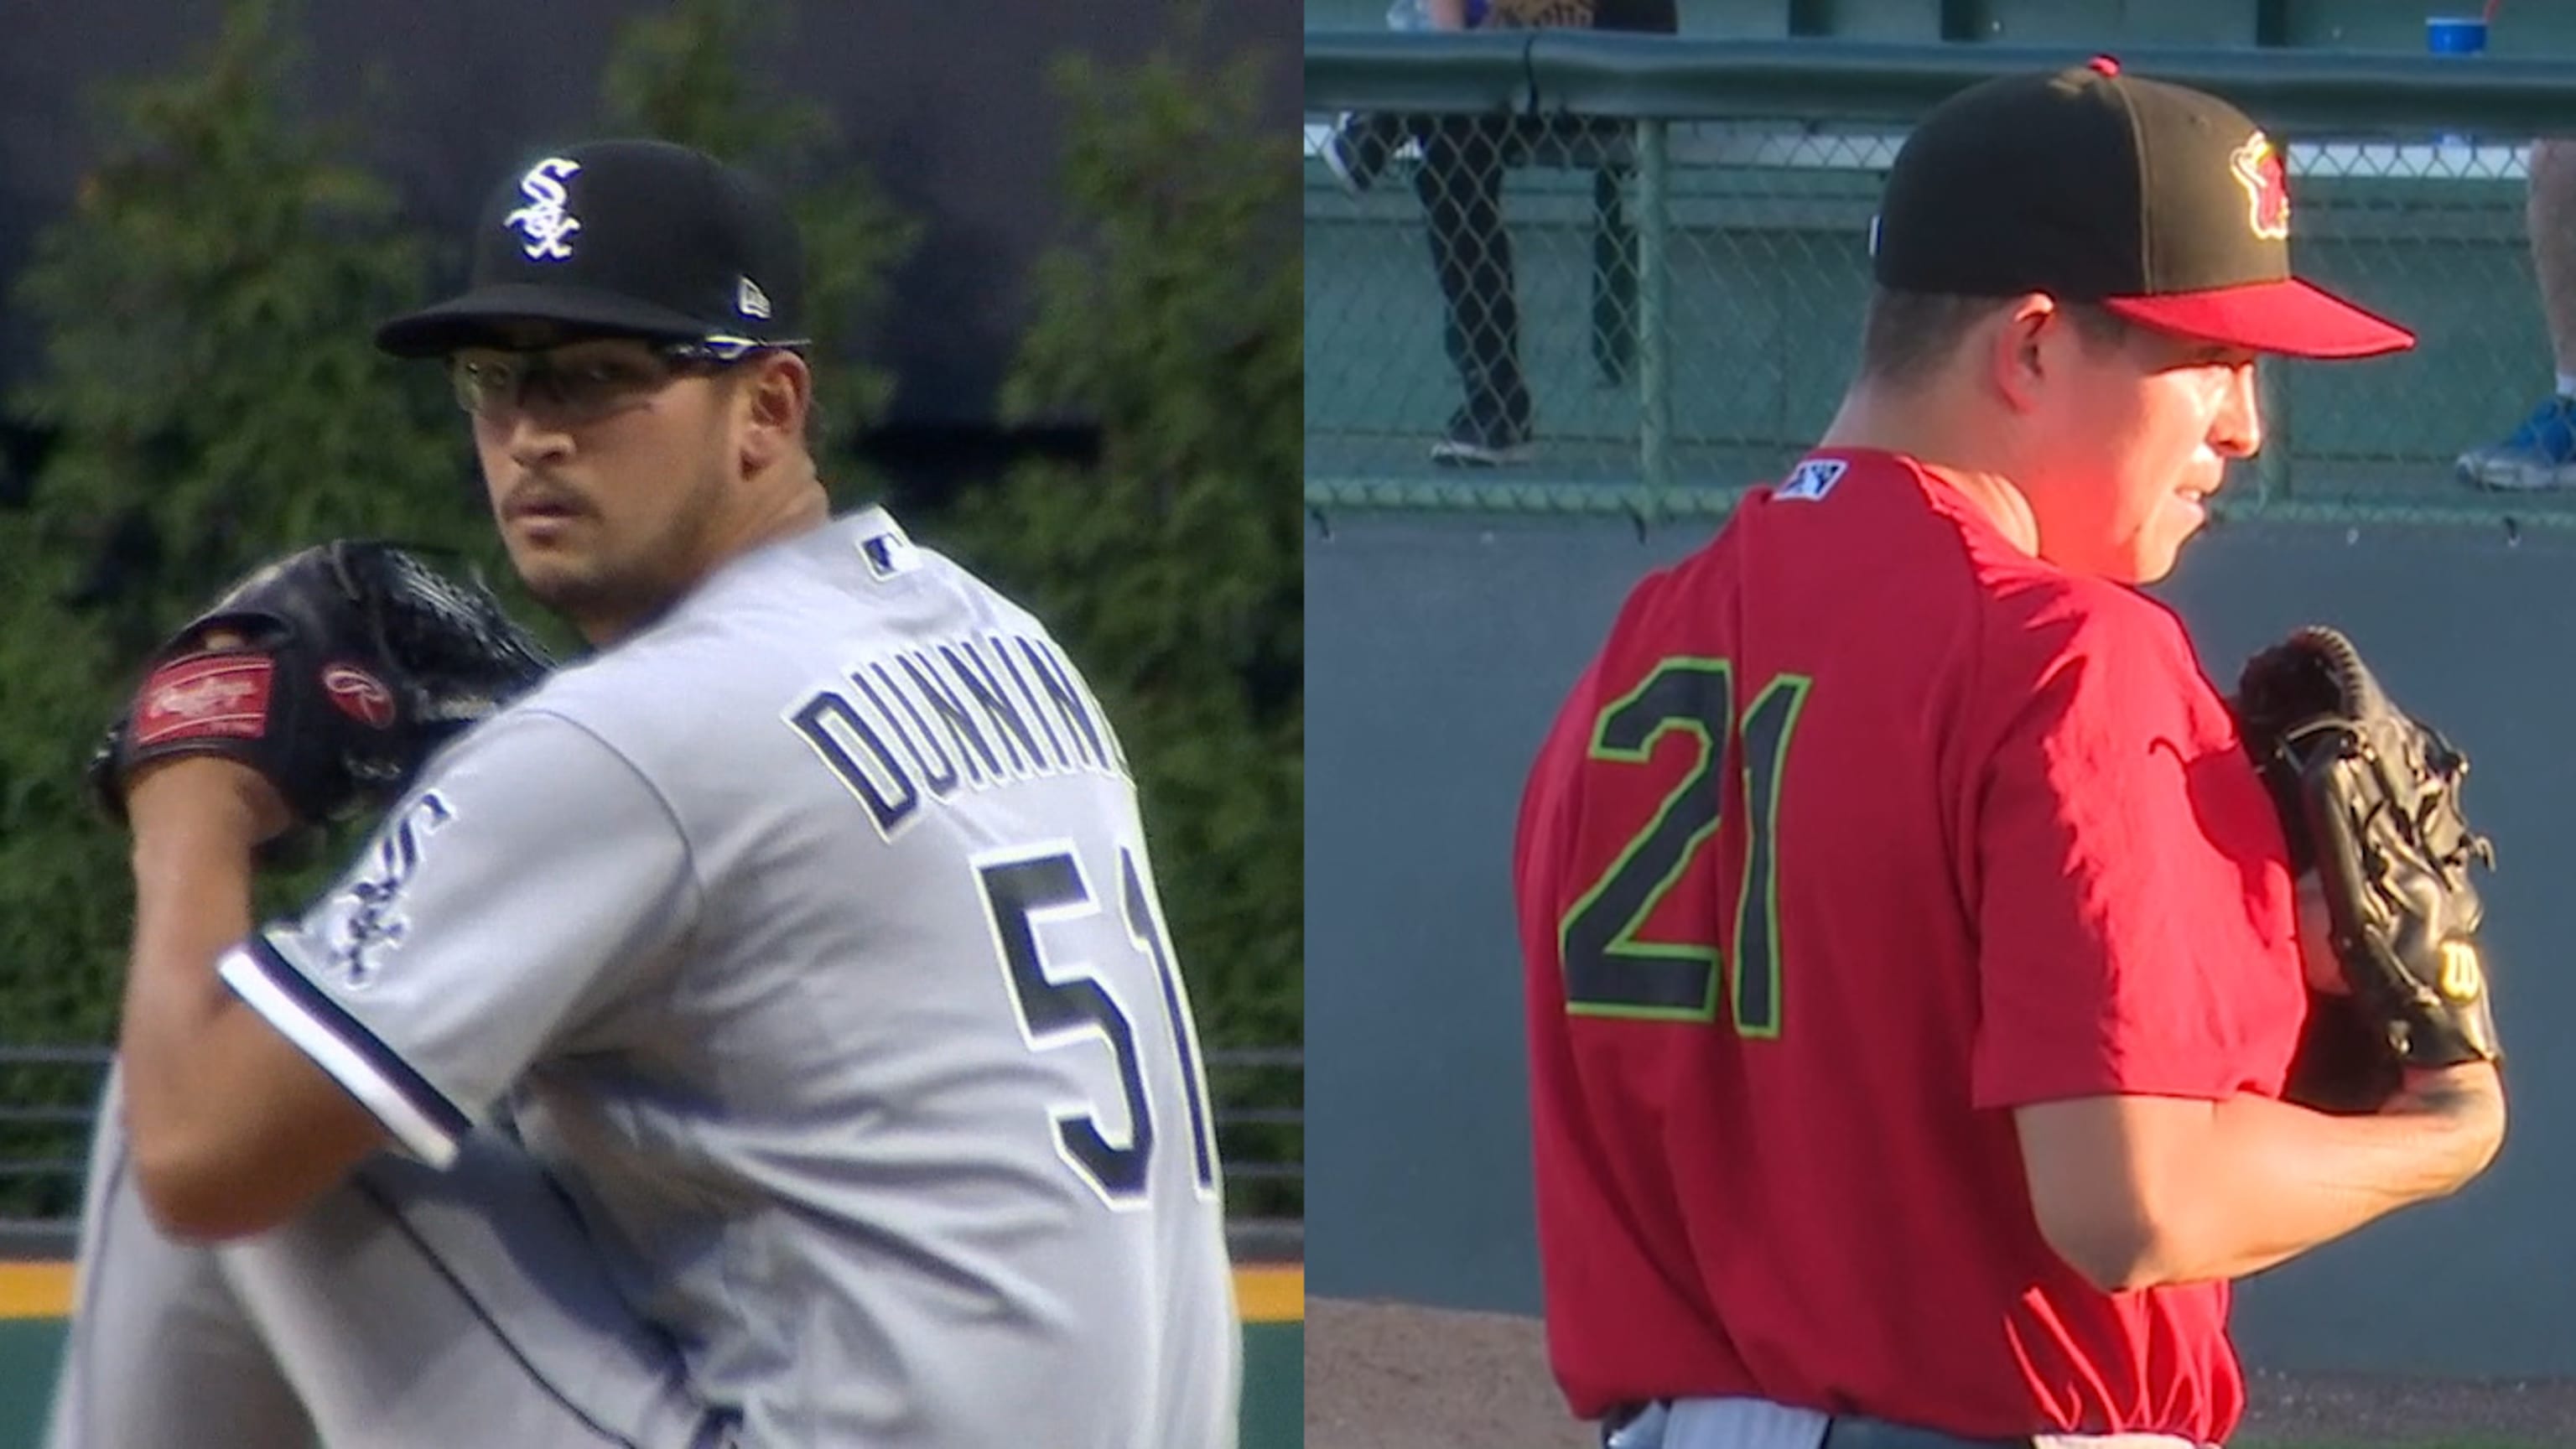 White Sox broadcaster implies Lance Lynn has weight issues